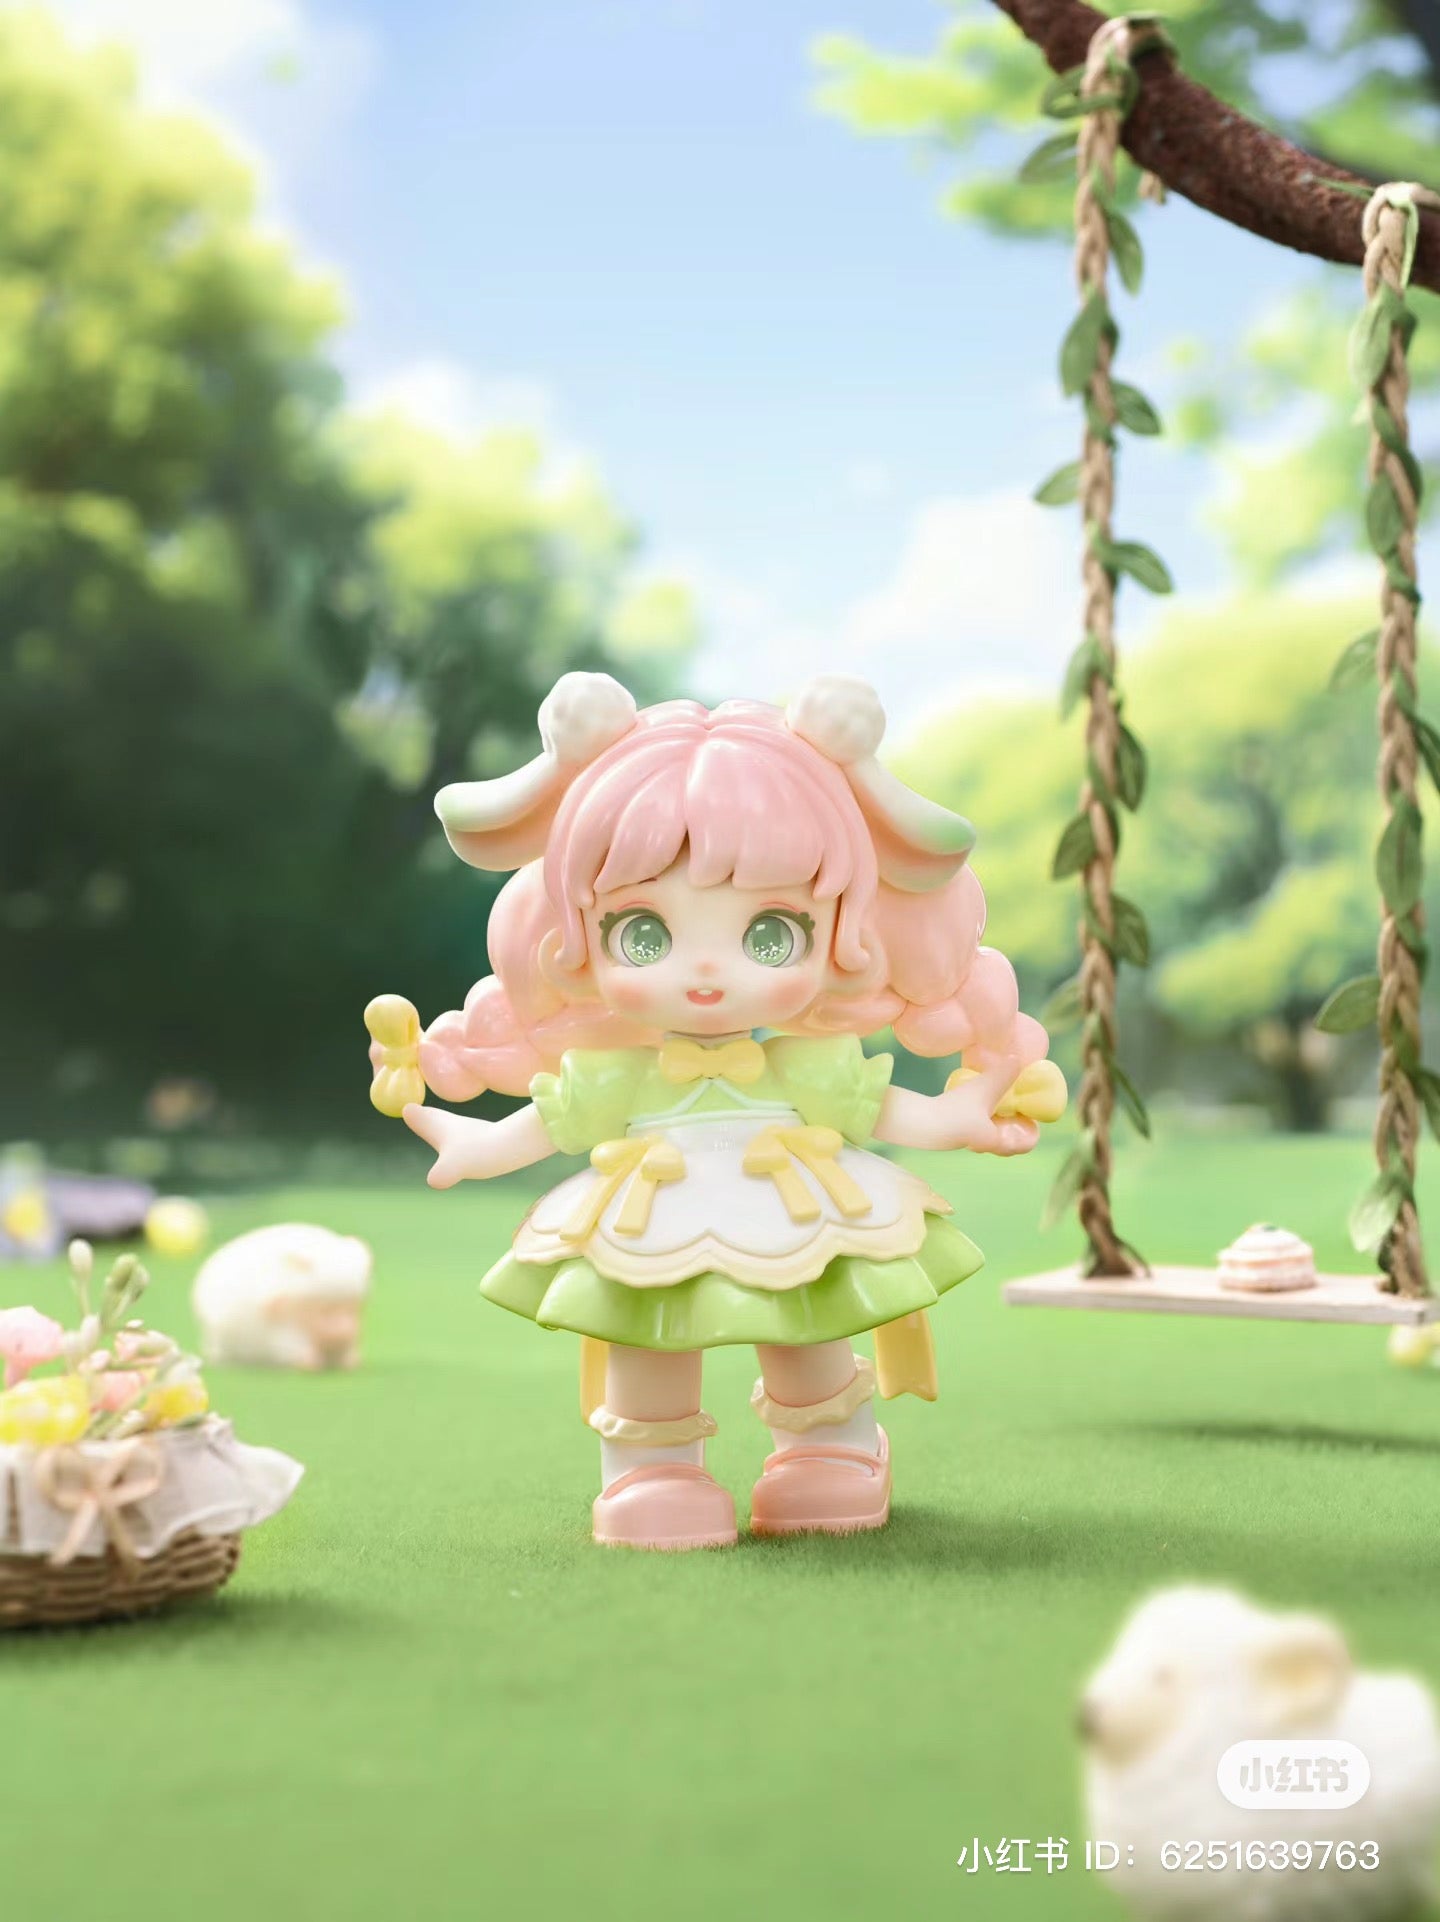 Toy girl on a swing from Miana - Tea Party In The Forest Blind Box Series. Includes 10 designs, 1 secret.